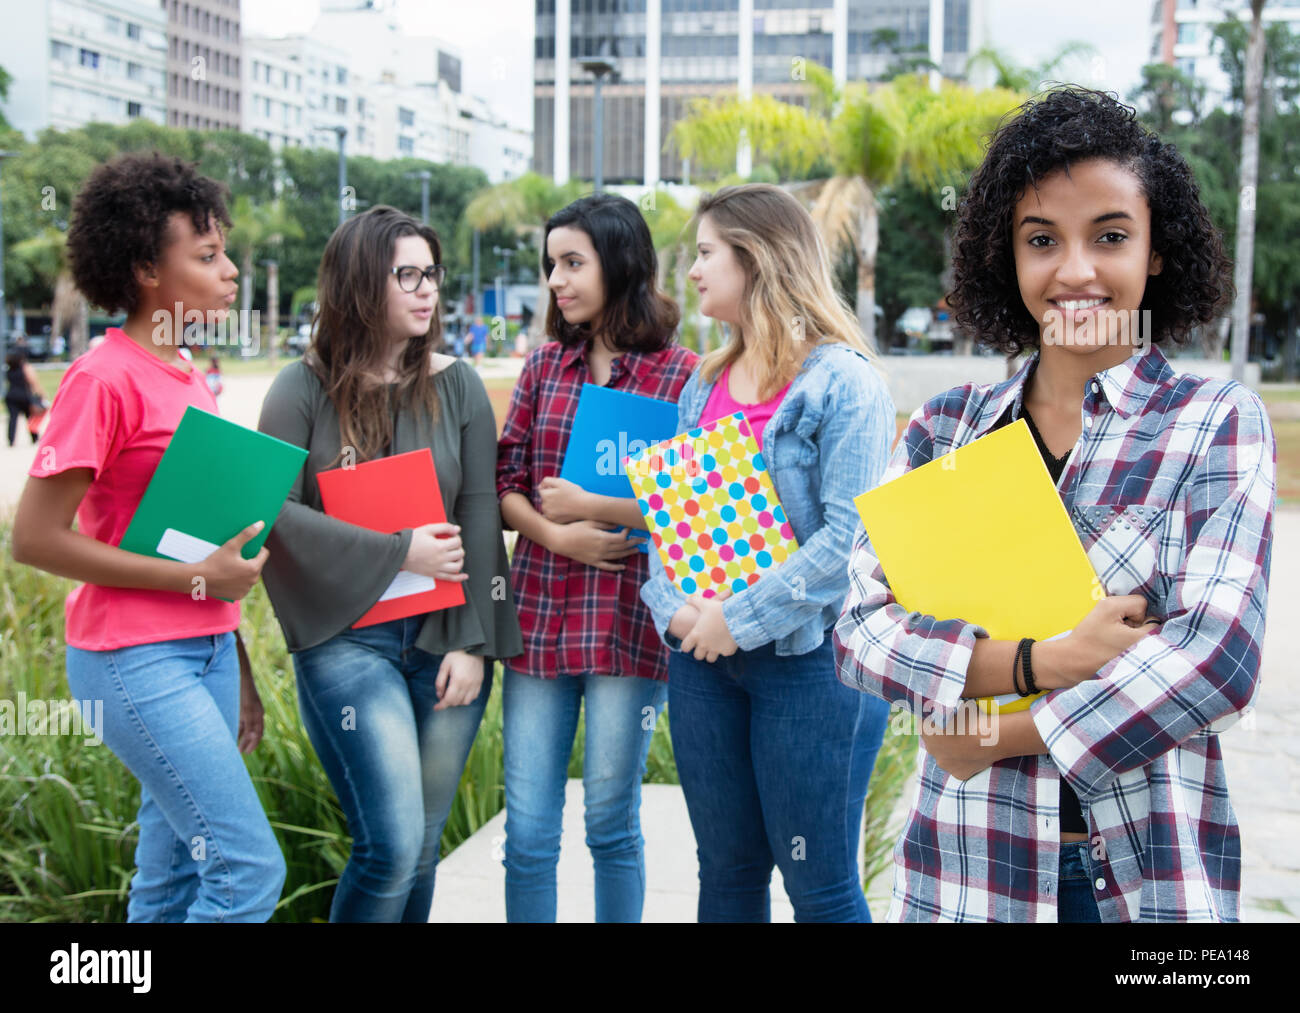 Latin american female student with group of international students outdoors on campus of university Stock Photo